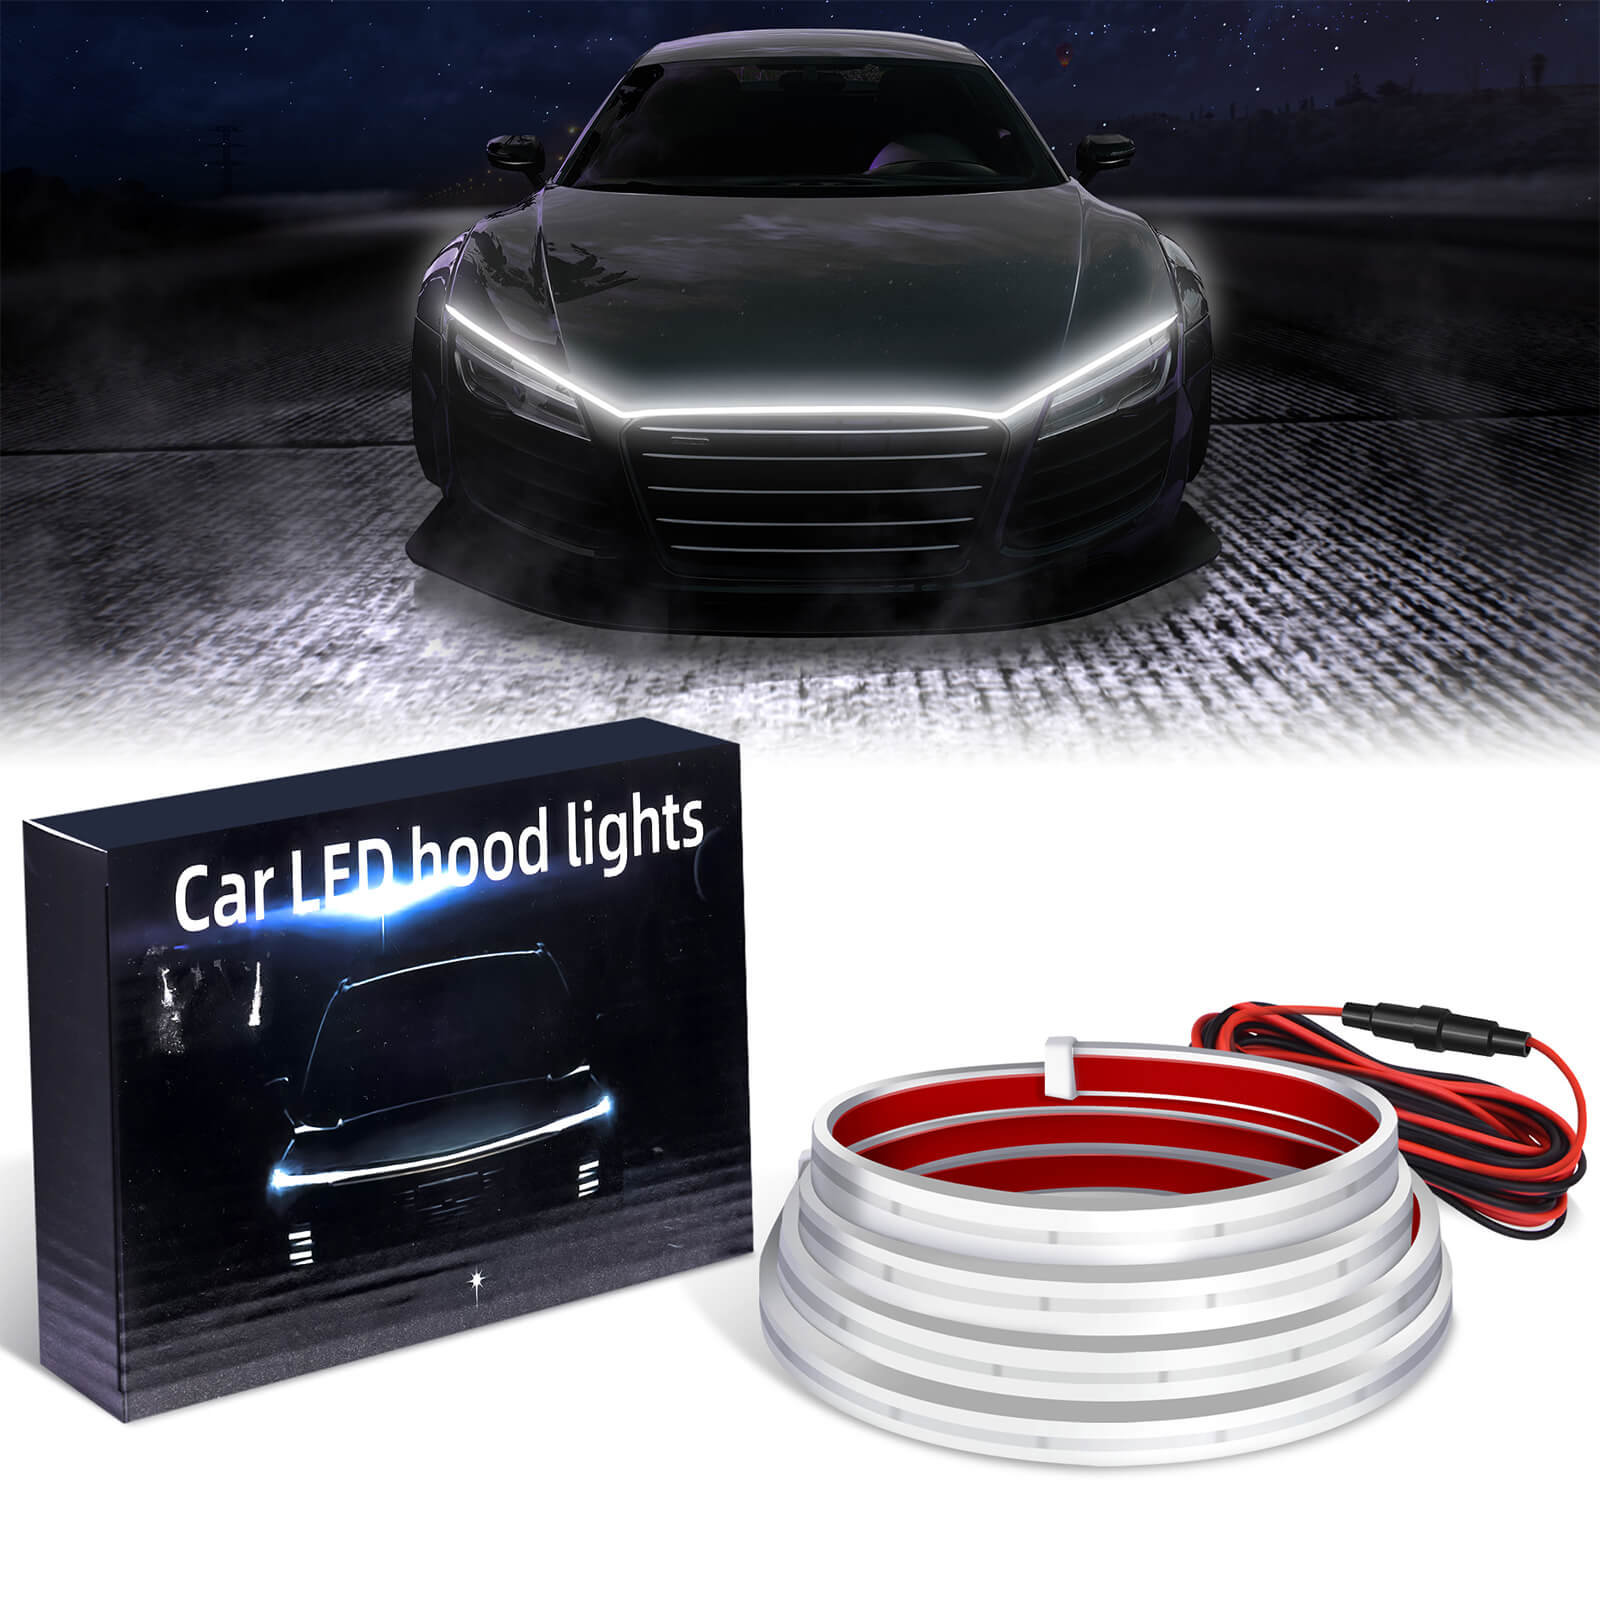 71 Inches Car Hood Light Strip, Flexible Exterior Car LED Strip Lights Waterproof (White) MICTUNING